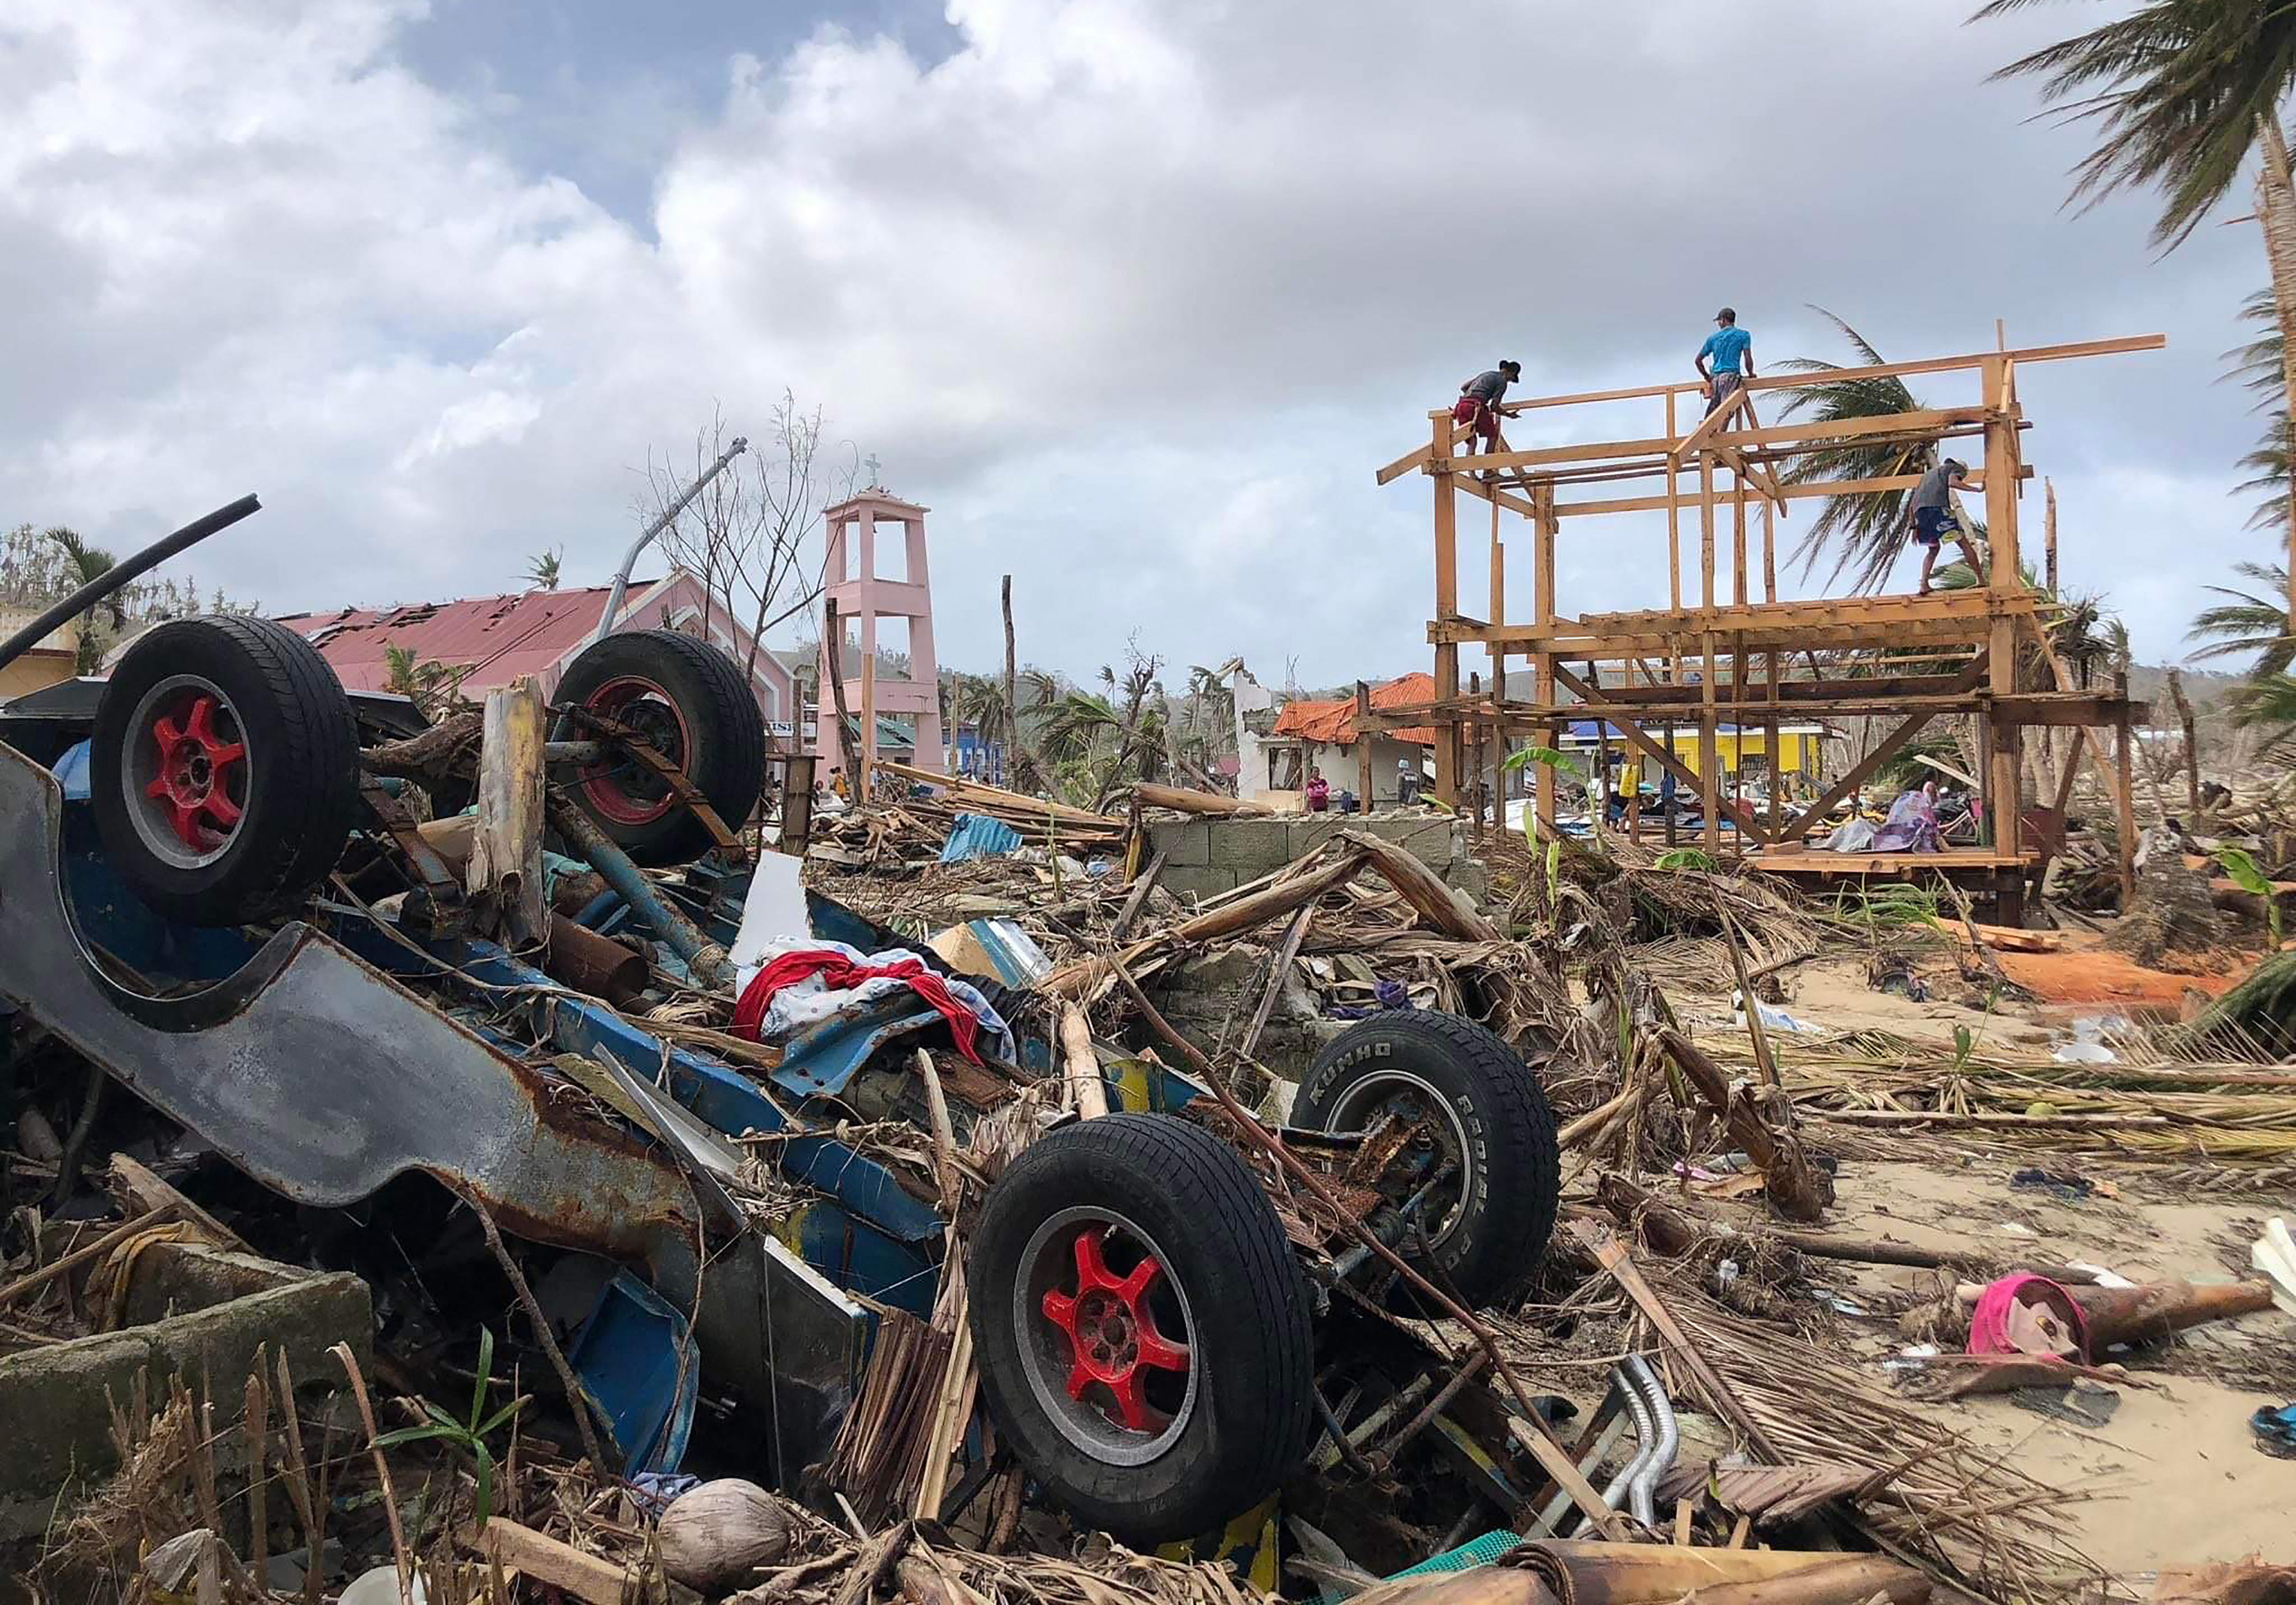 The aftermath of Typhoon Rai on Siargao in the Philippines. The tourism-dependent island, already struggling economically amid Covid-19 travel curbs, has suffered widespread devastation. Photo: Roel Catoto/AFP